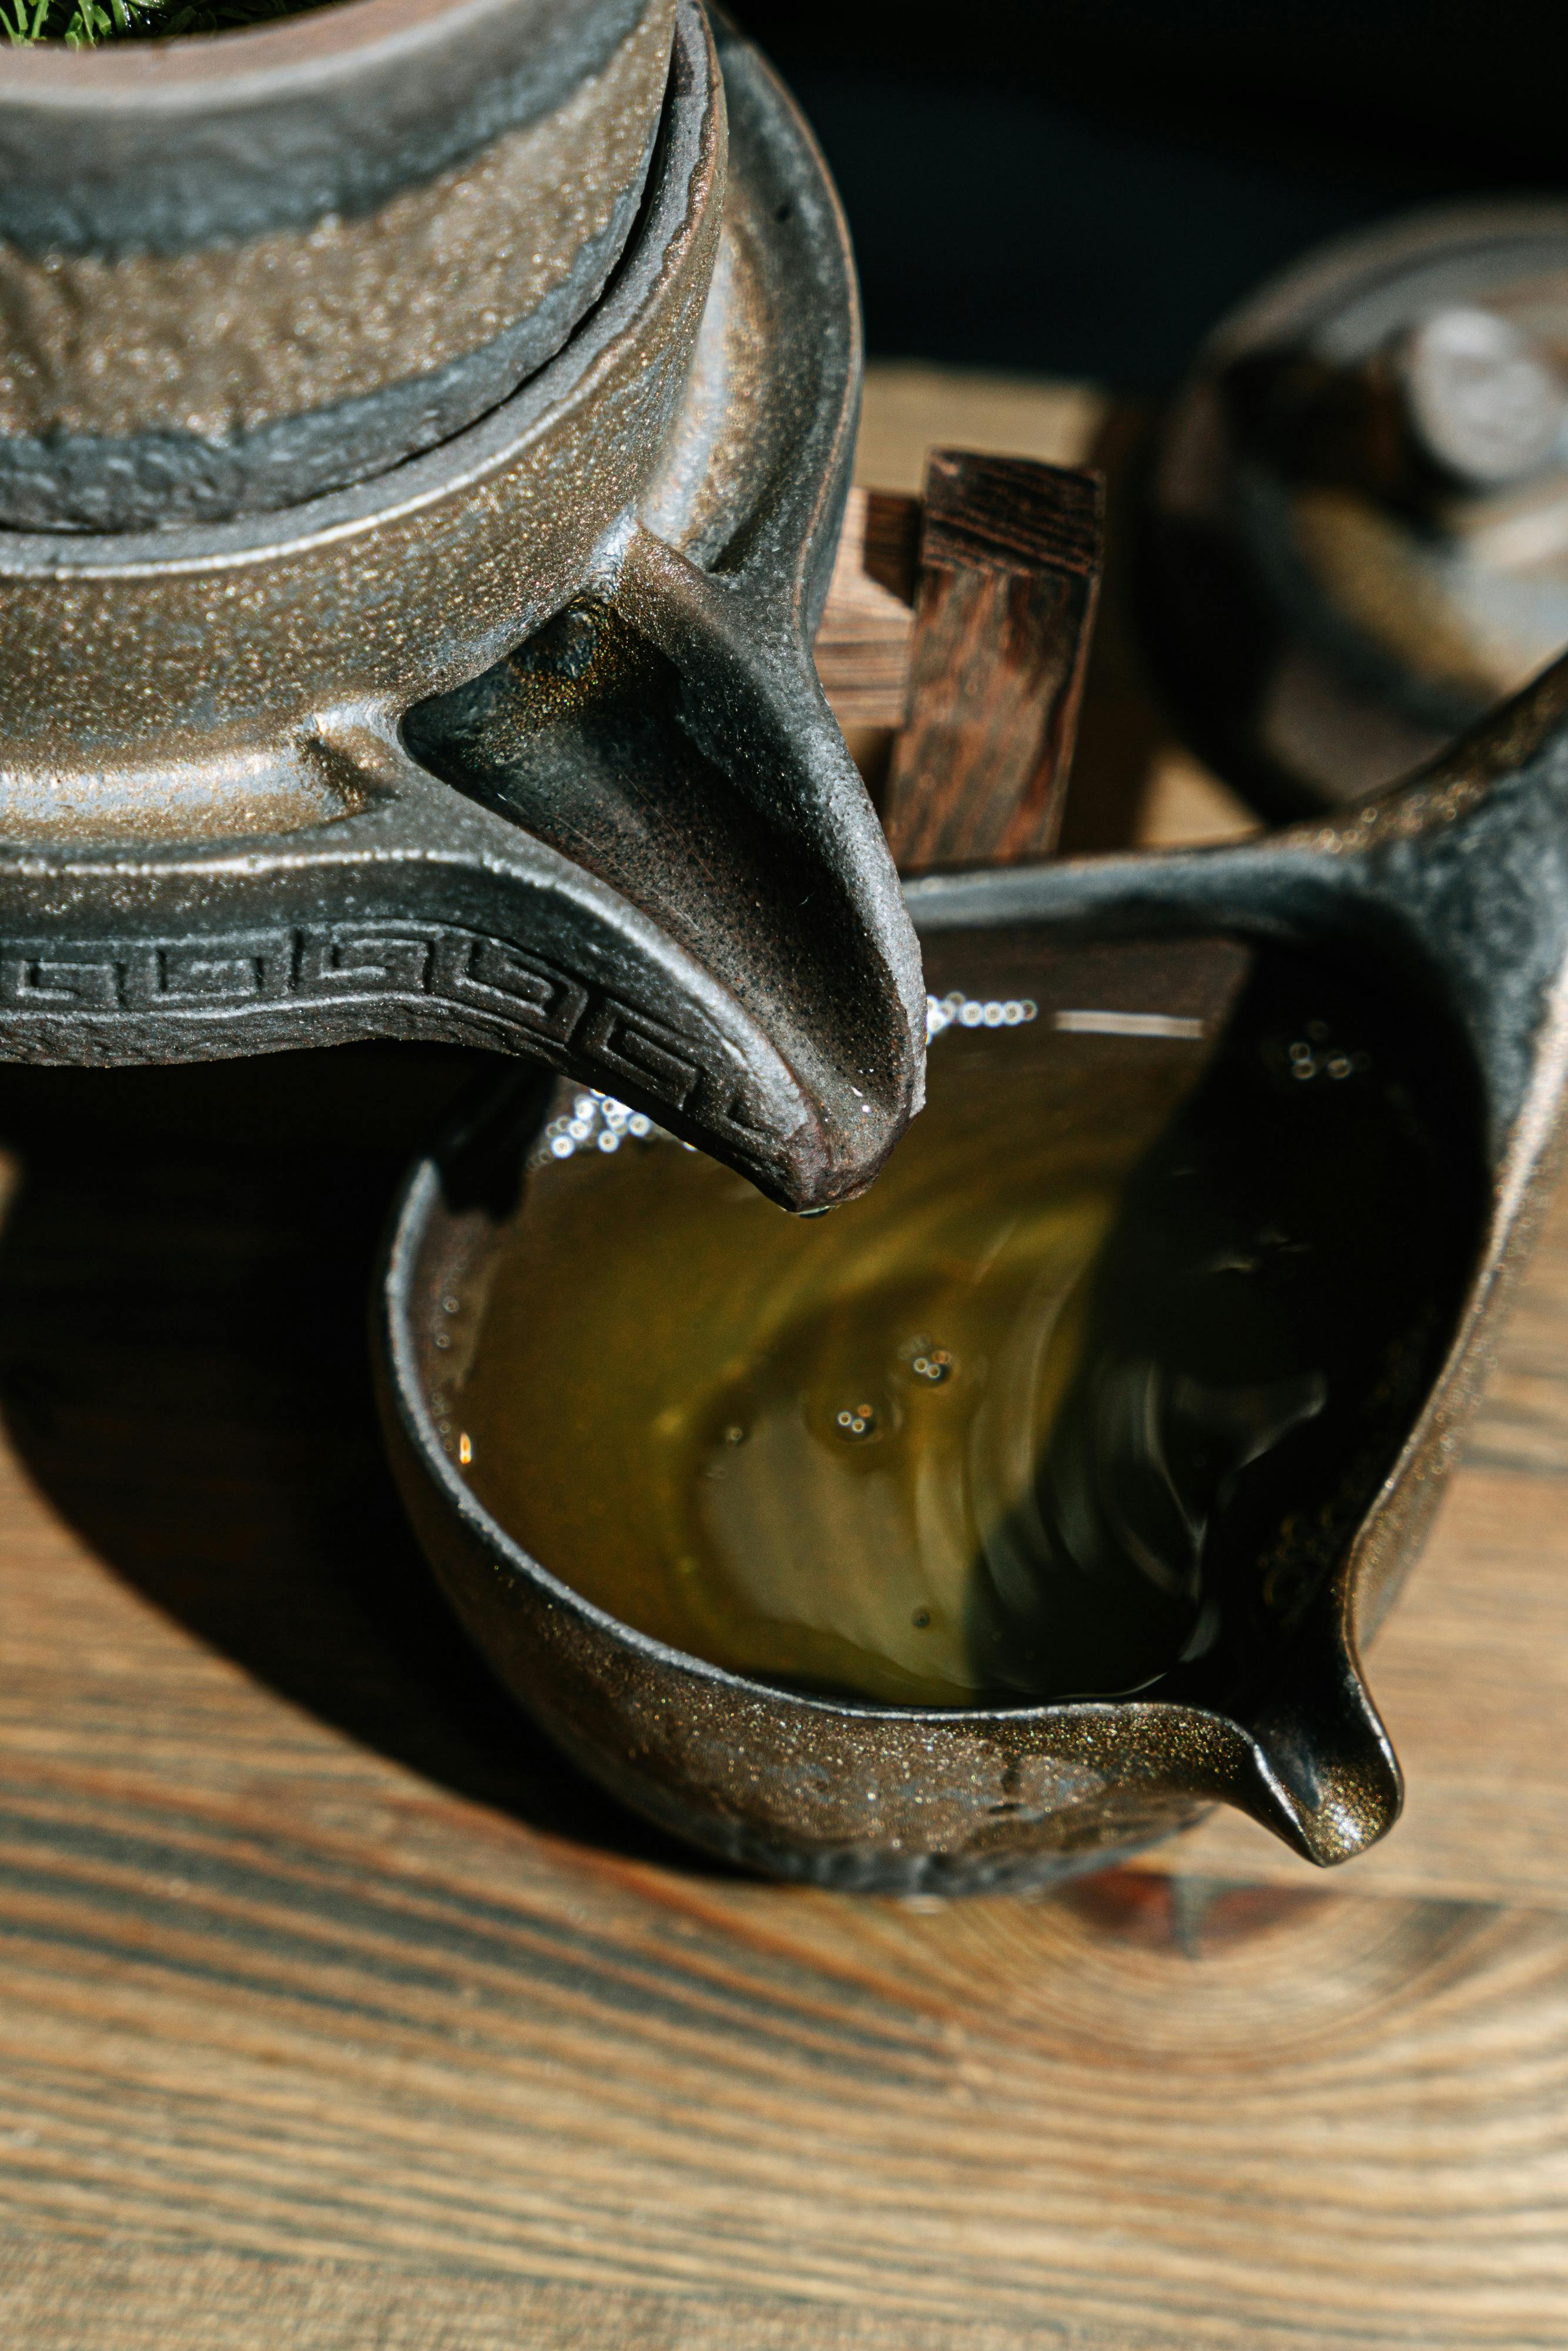 Discover the Top 10 Evidence-Based Benefits of Green Tea